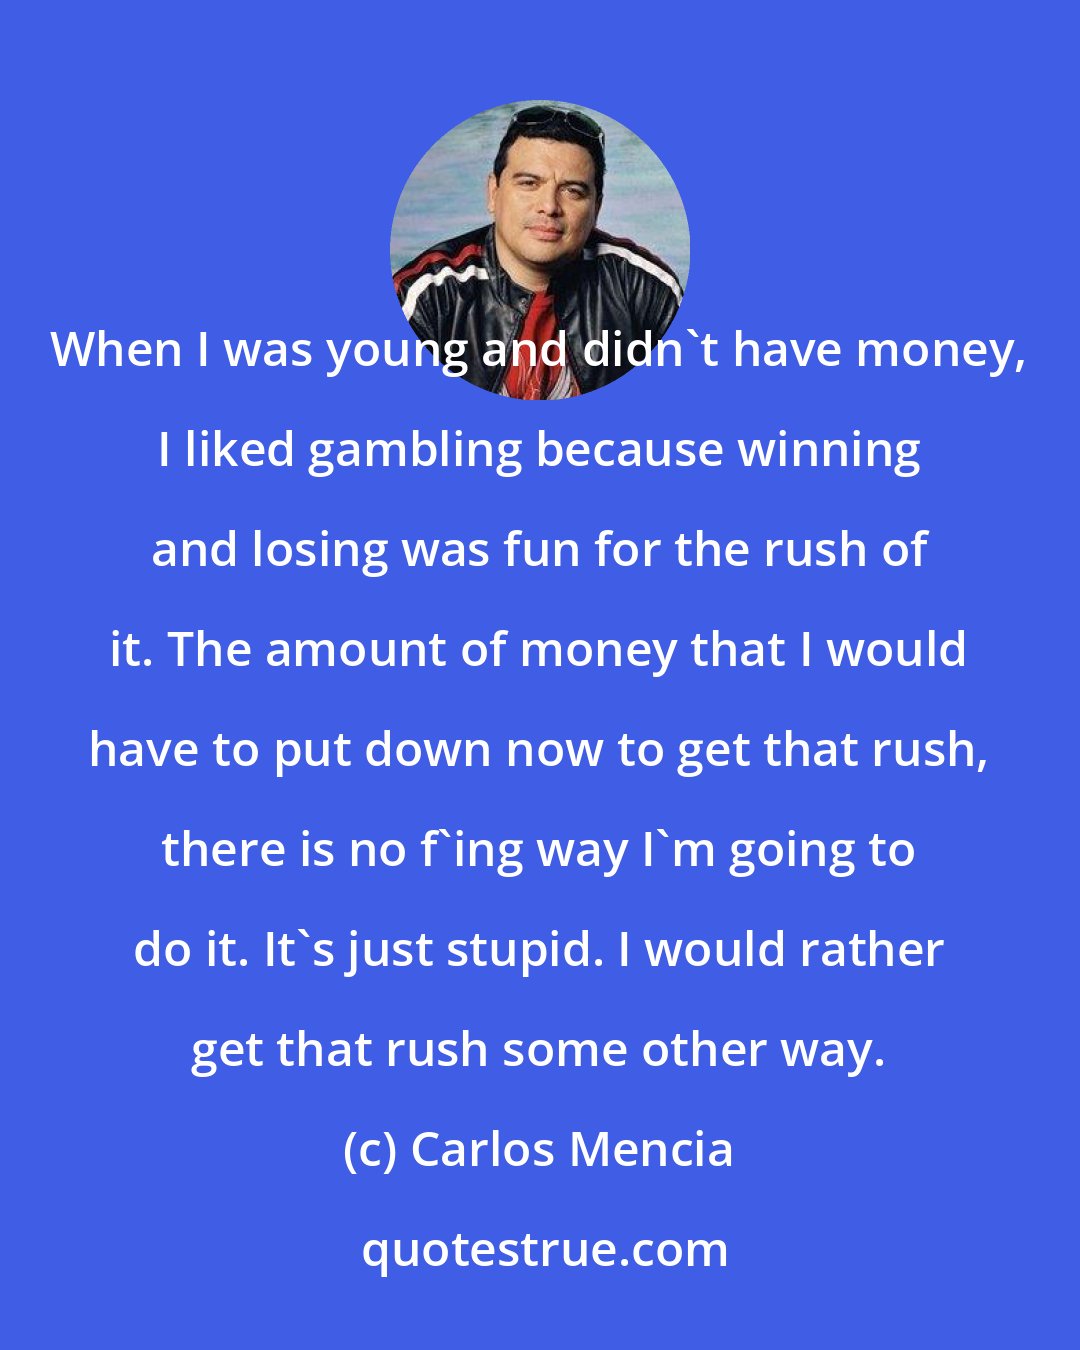 Carlos Mencia: When I was young and didn't have money, I liked gambling because winning and losing was fun for the rush of it. The amount of money that I would have to put down now to get that rush, there is no f'ing way I'm going to do it. It's just stupid. I would rather get that rush some other way.